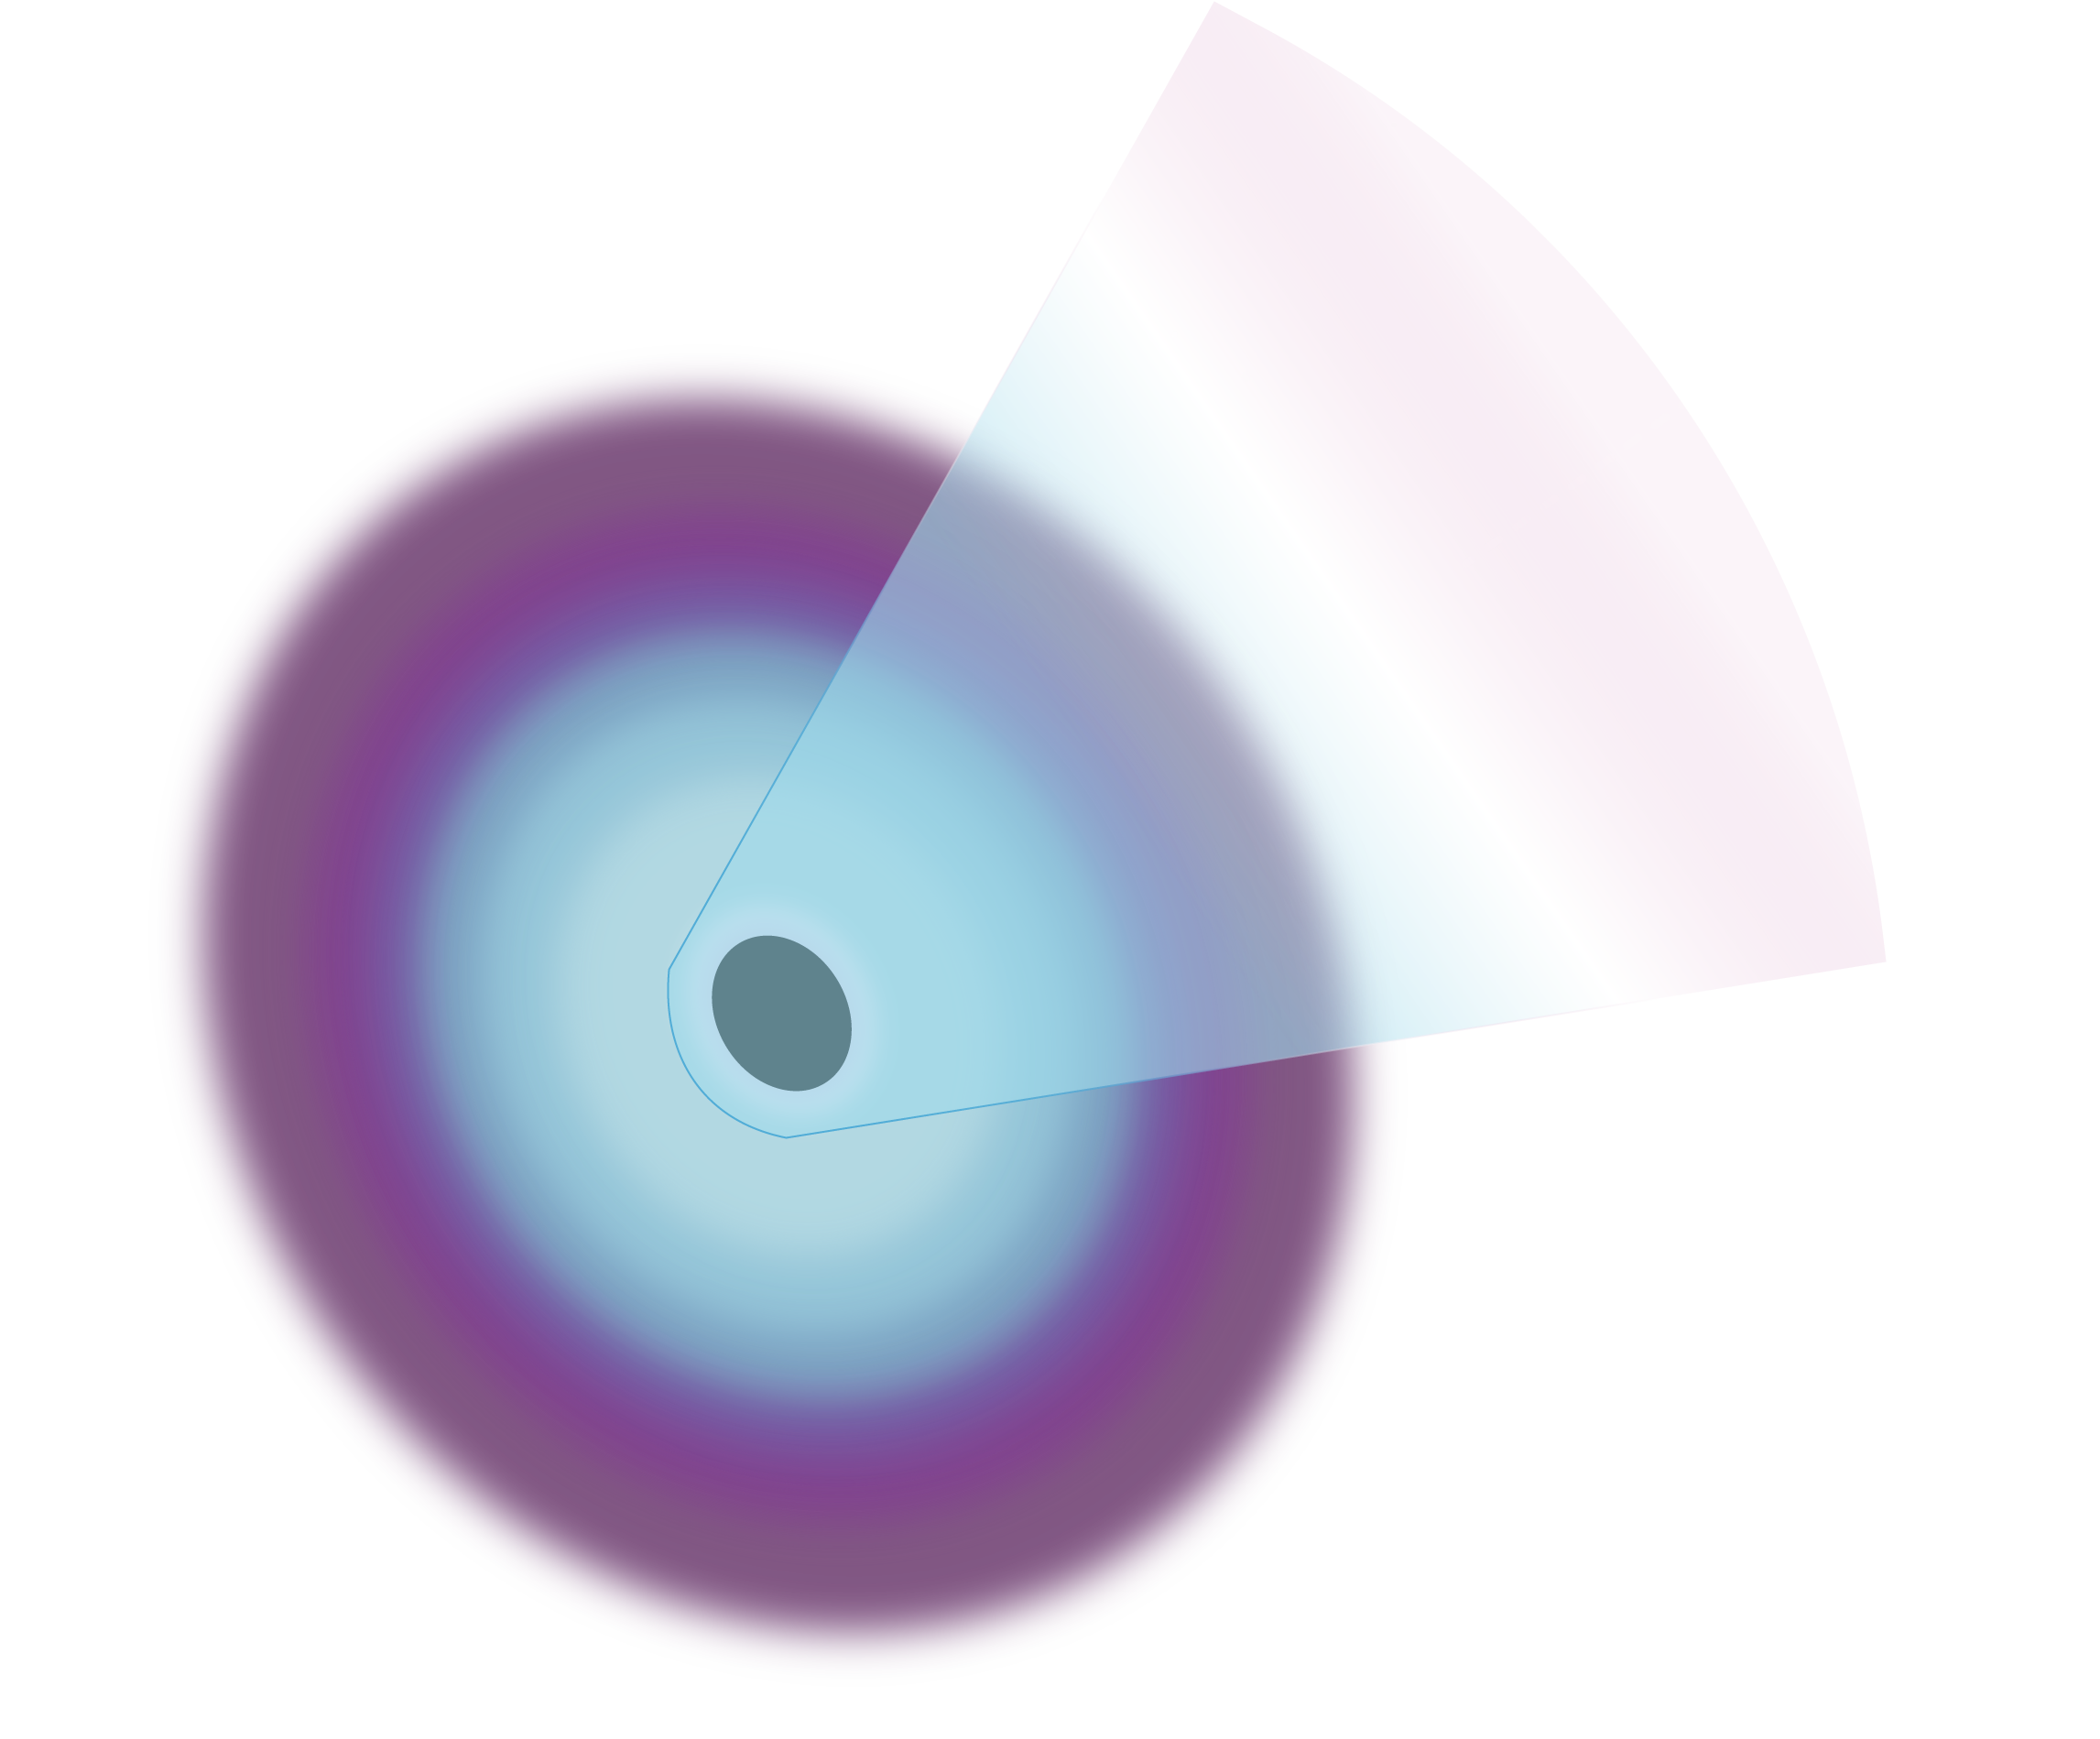 A graphic shows a diffused, dark purple ring that fades inward to a bright purple, a lighter purple, and eventually to a light blue gradient. At the center of the circular object is a small black circle from which a transparent beam is emitted, starting as a transparent blue and moving into green, yellow, orange and red.